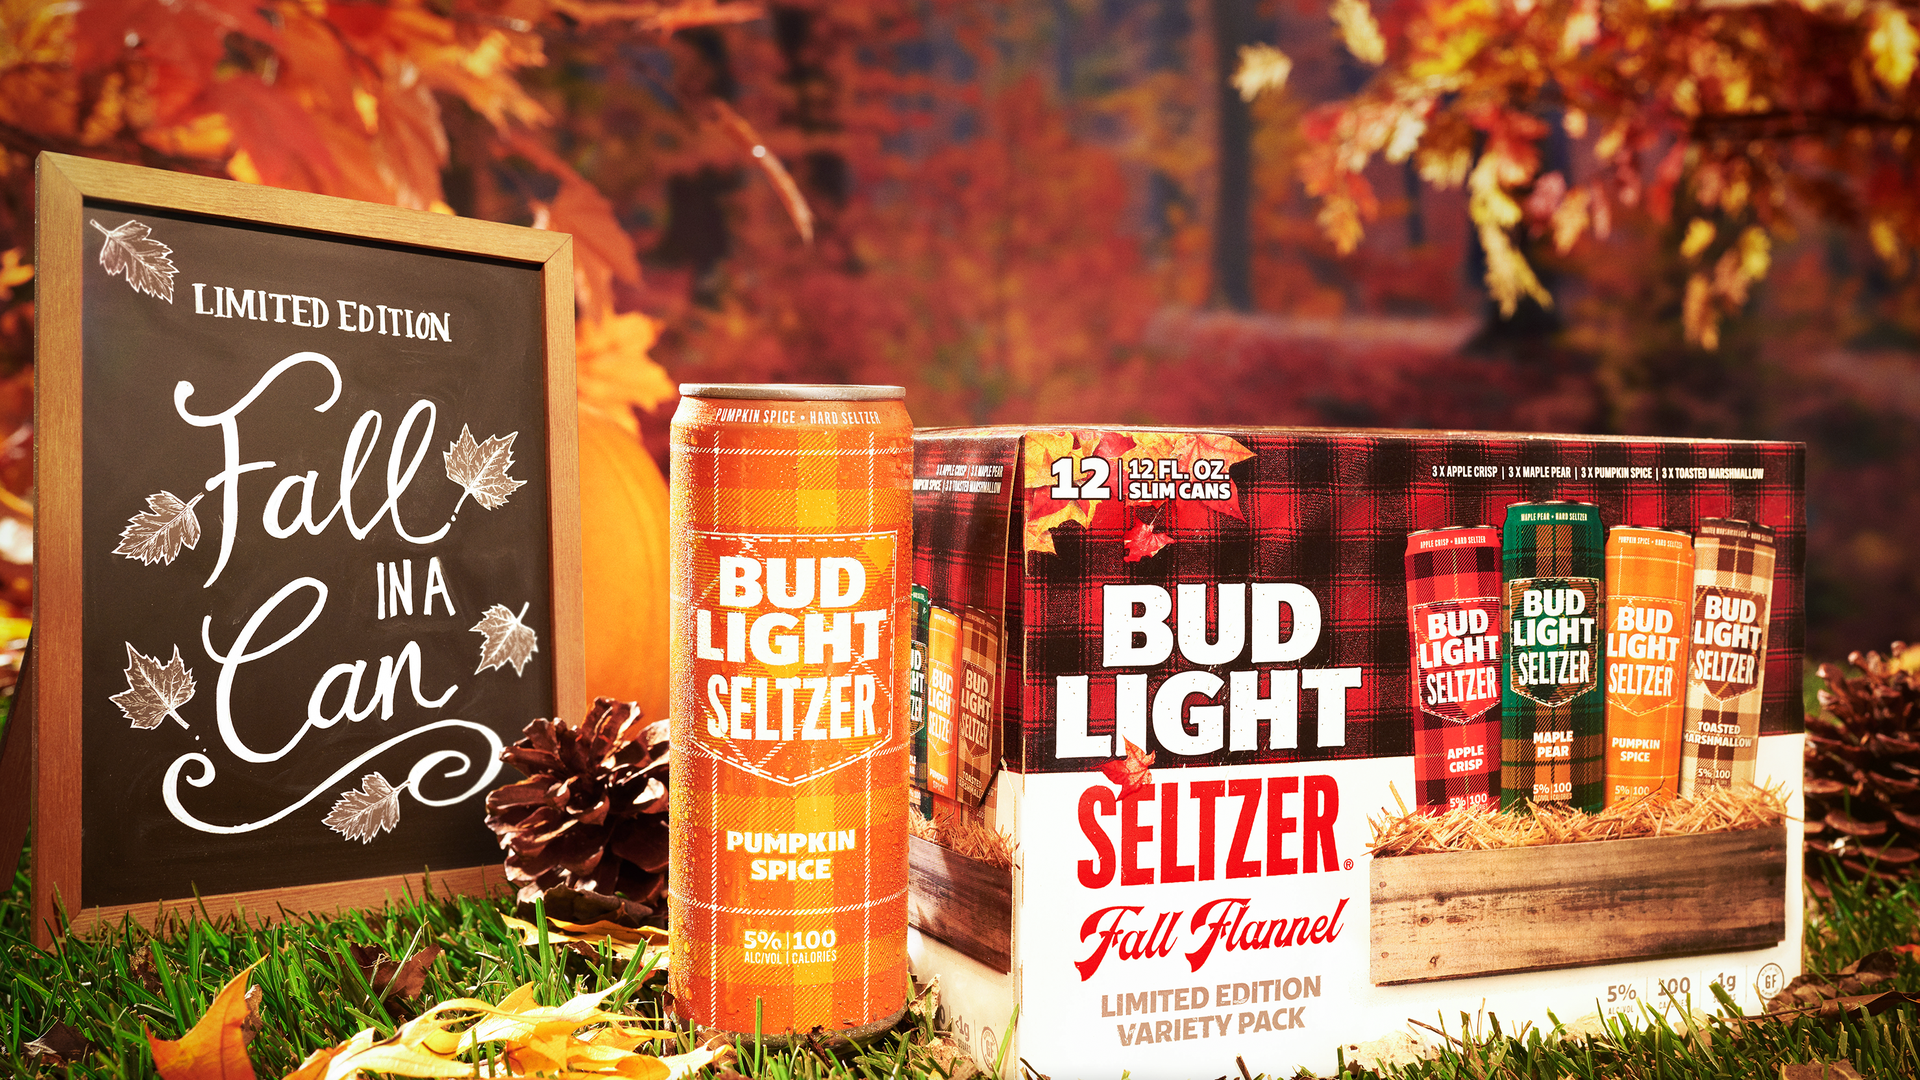 Promo photo of Bud Light Pumpkin Spice Seltzer along with the 